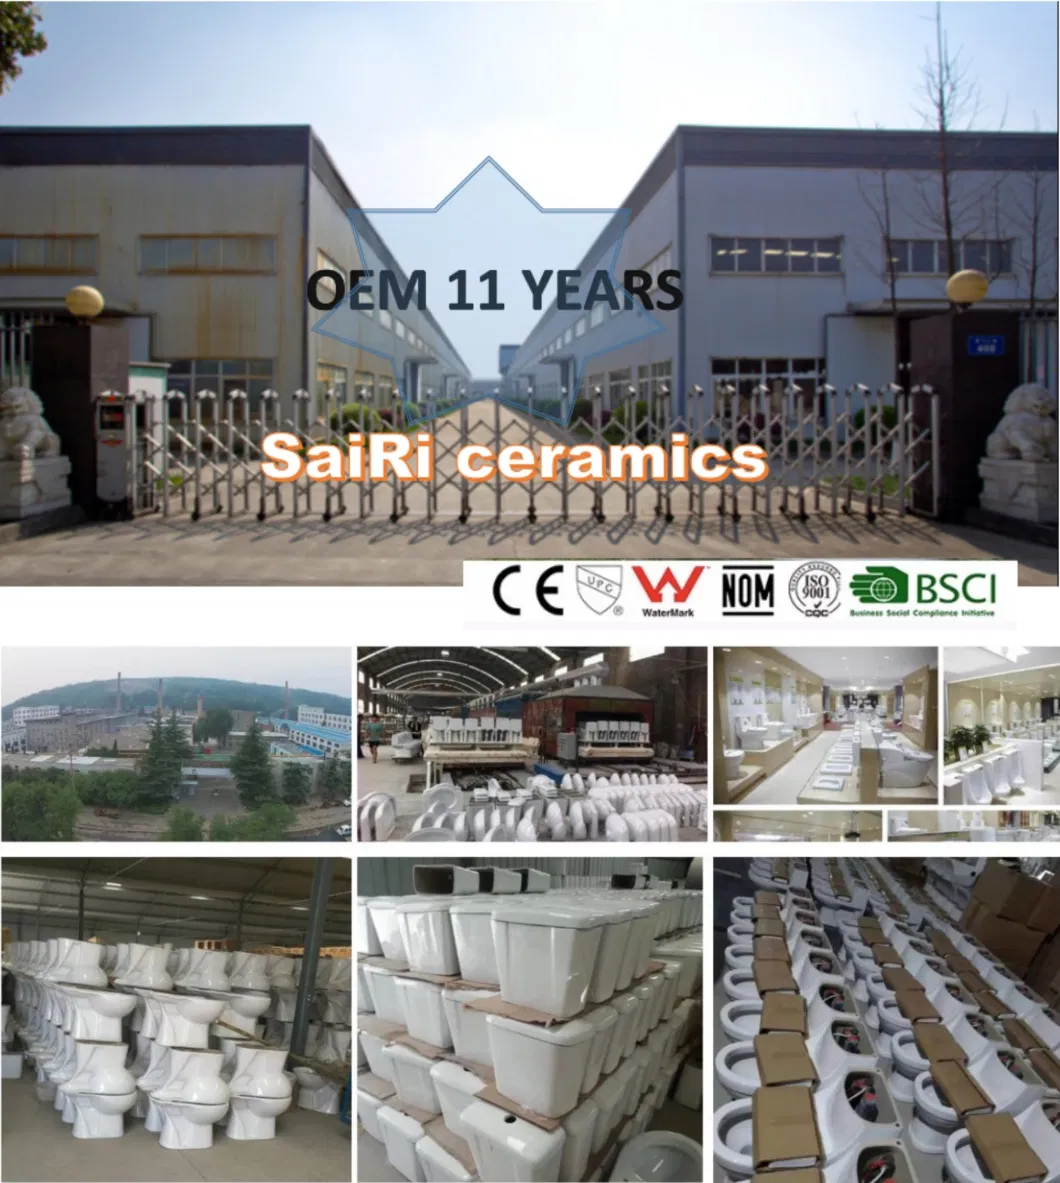 Sairi OEM Factory Public Wall Sink Sanitary Club Mall Pissing Device Compost Urinals Wc Urinal